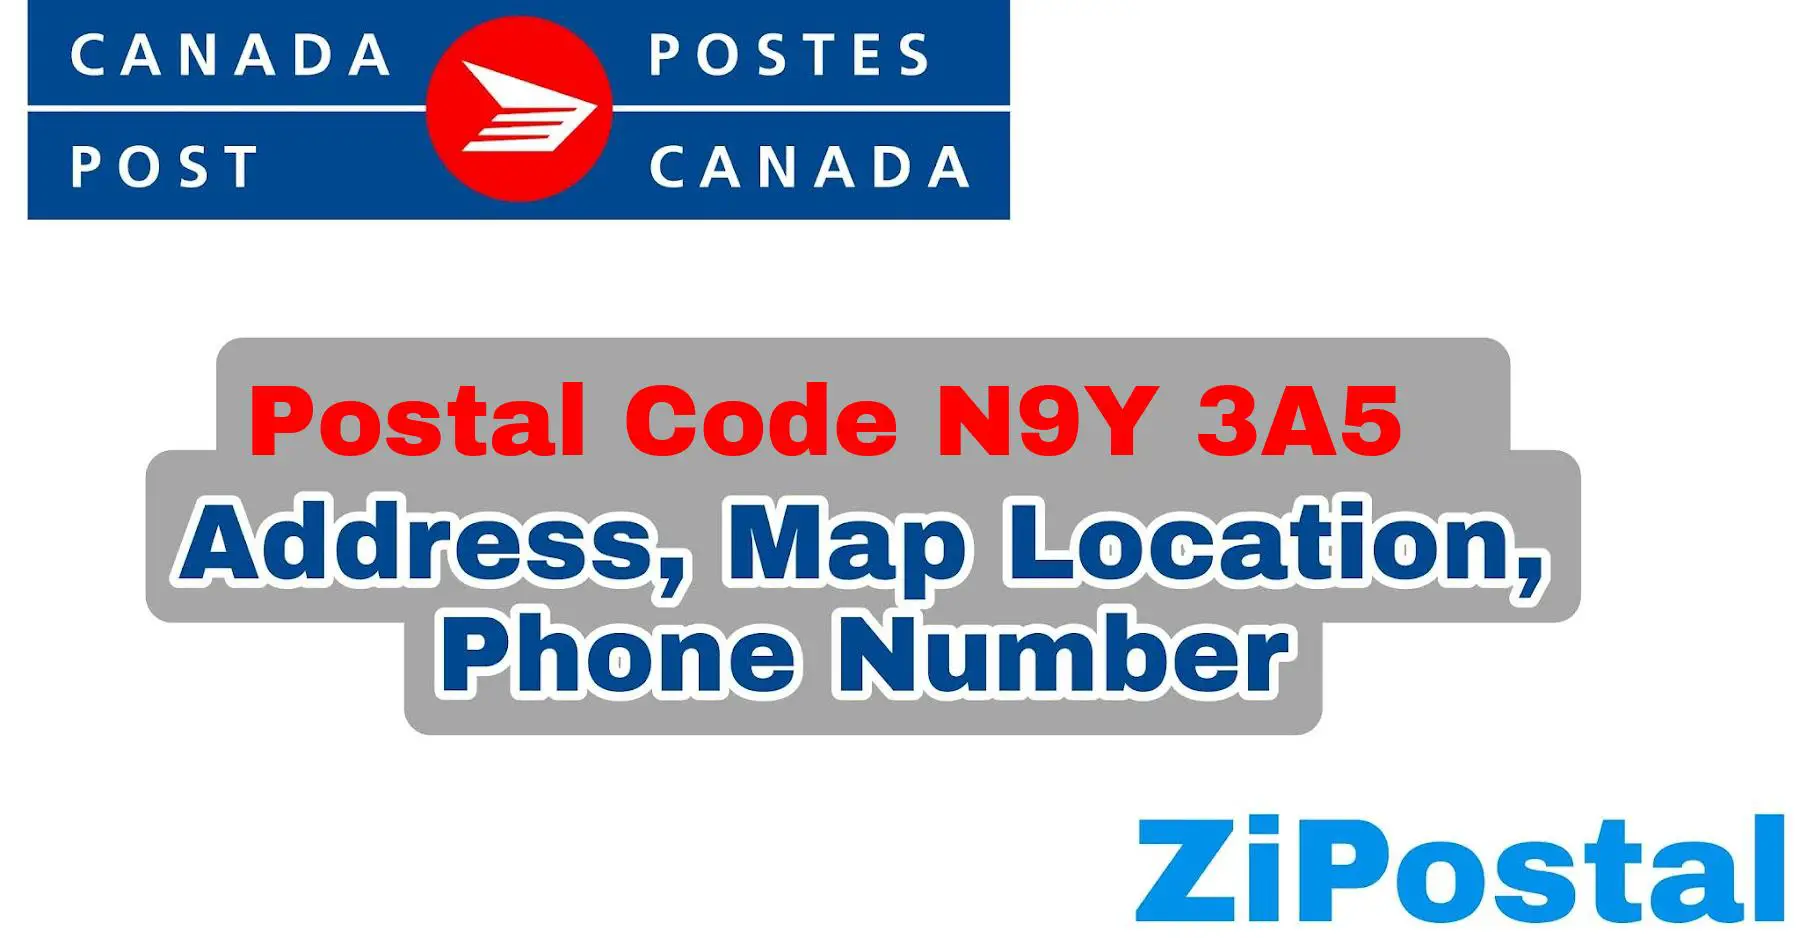 Postal Code N9Y 3A5 Address Map Location and Phone Number